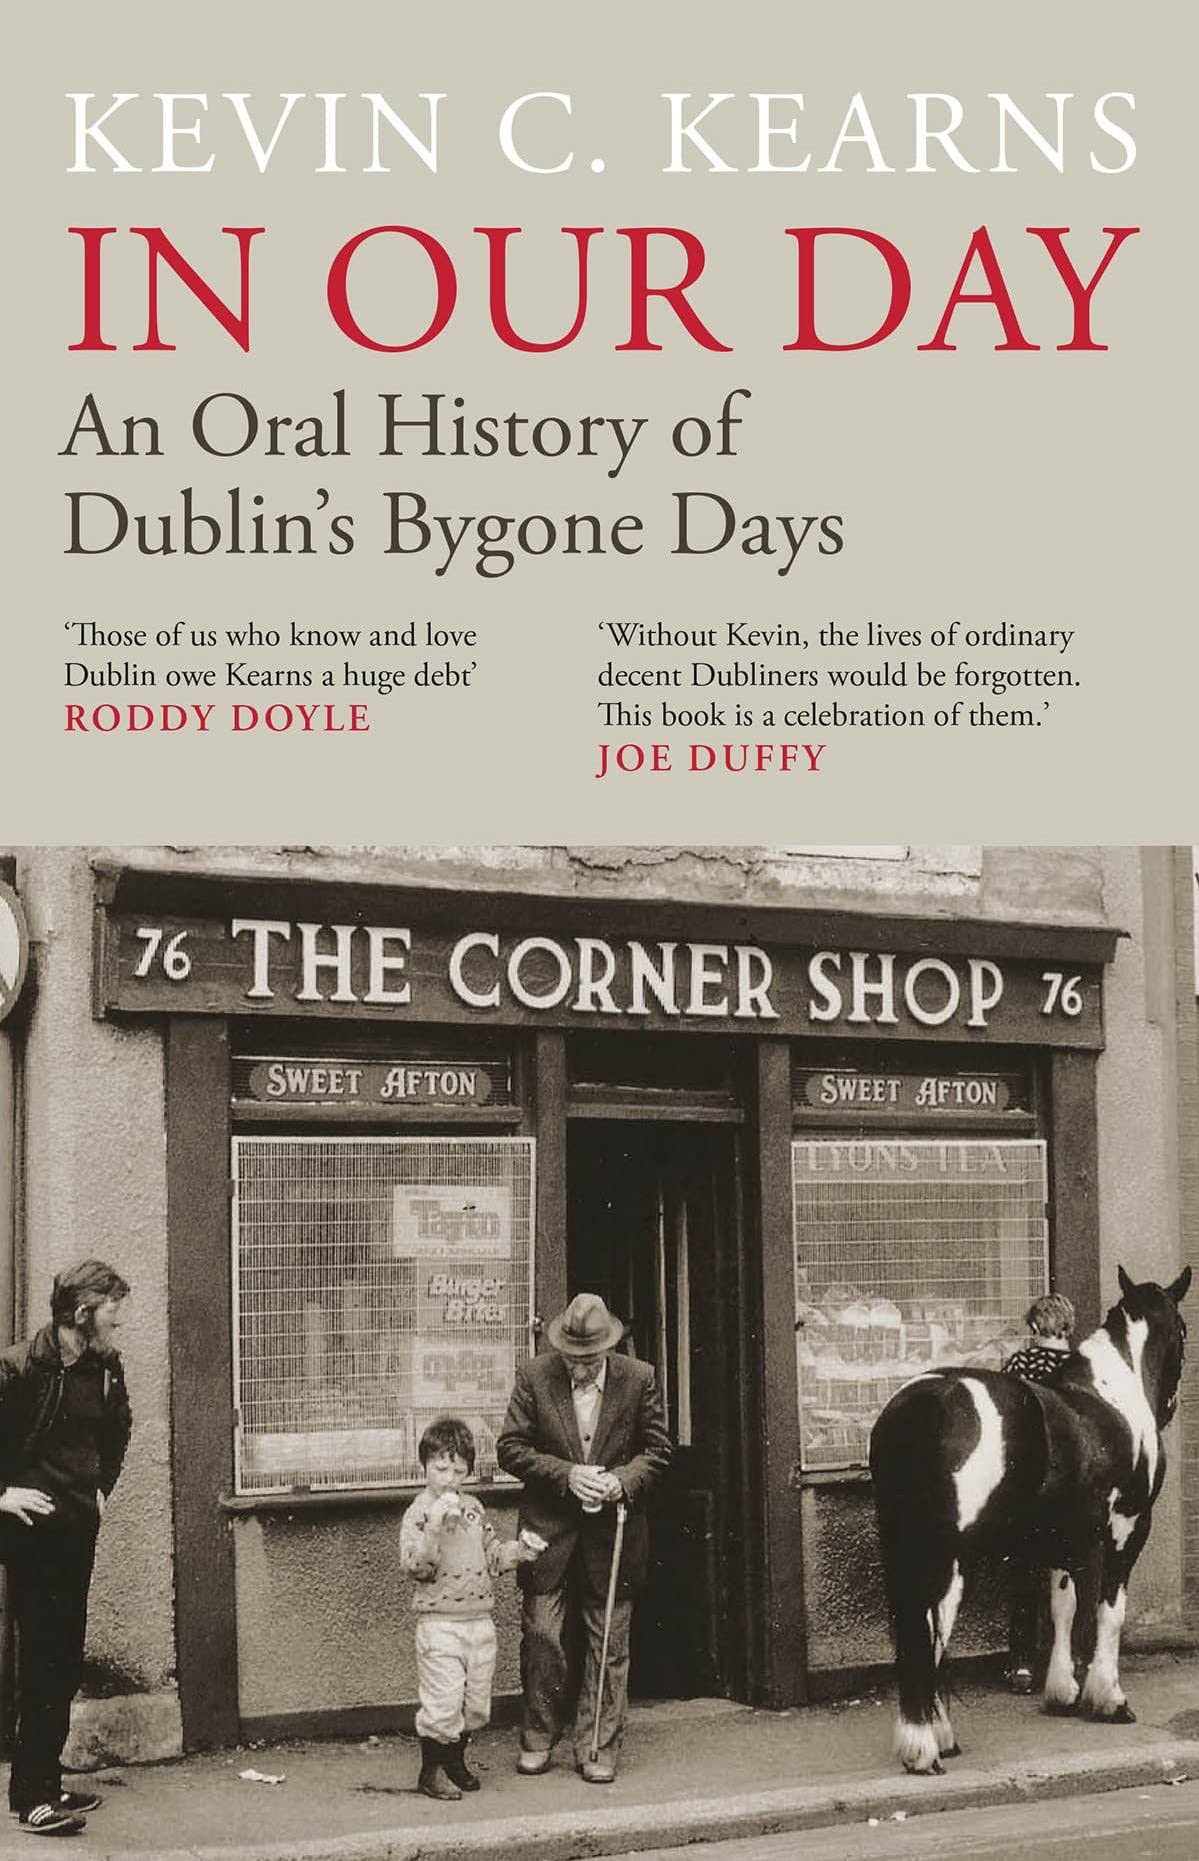 In Our Day: An Oral History of Dublin's Bygone Days [Book]